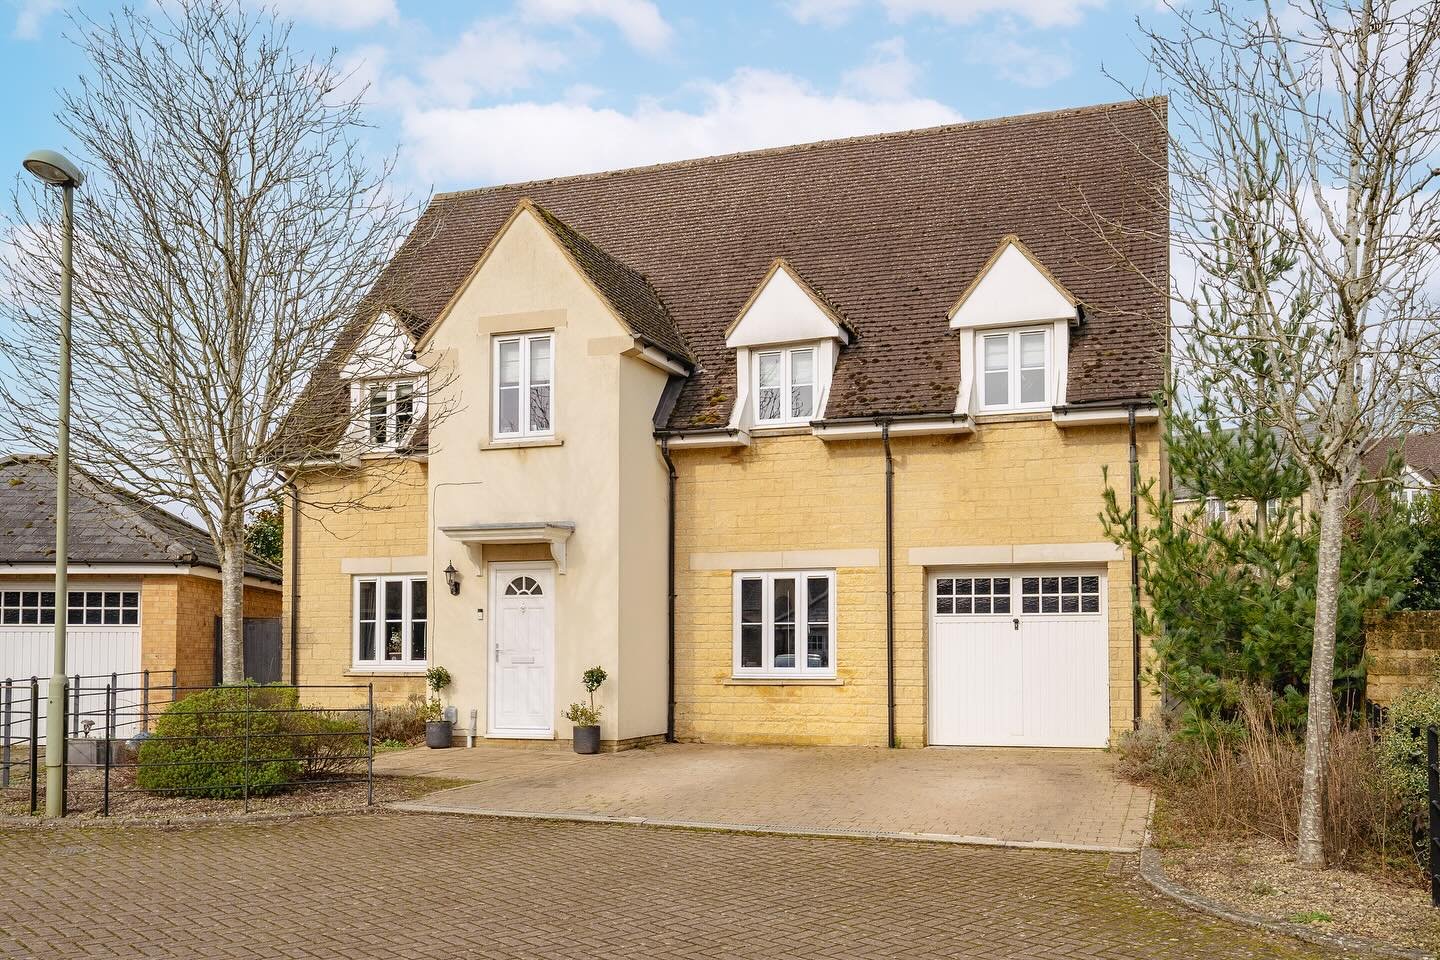 FOR SALE - Fowlers Court, Chipping Norton📍

Located in the bustling town of Chipping Norton, this five-bedroom detached home is situated within a modern development and offers ample living space for a comfortable and spacious lifestyle.

Whether you